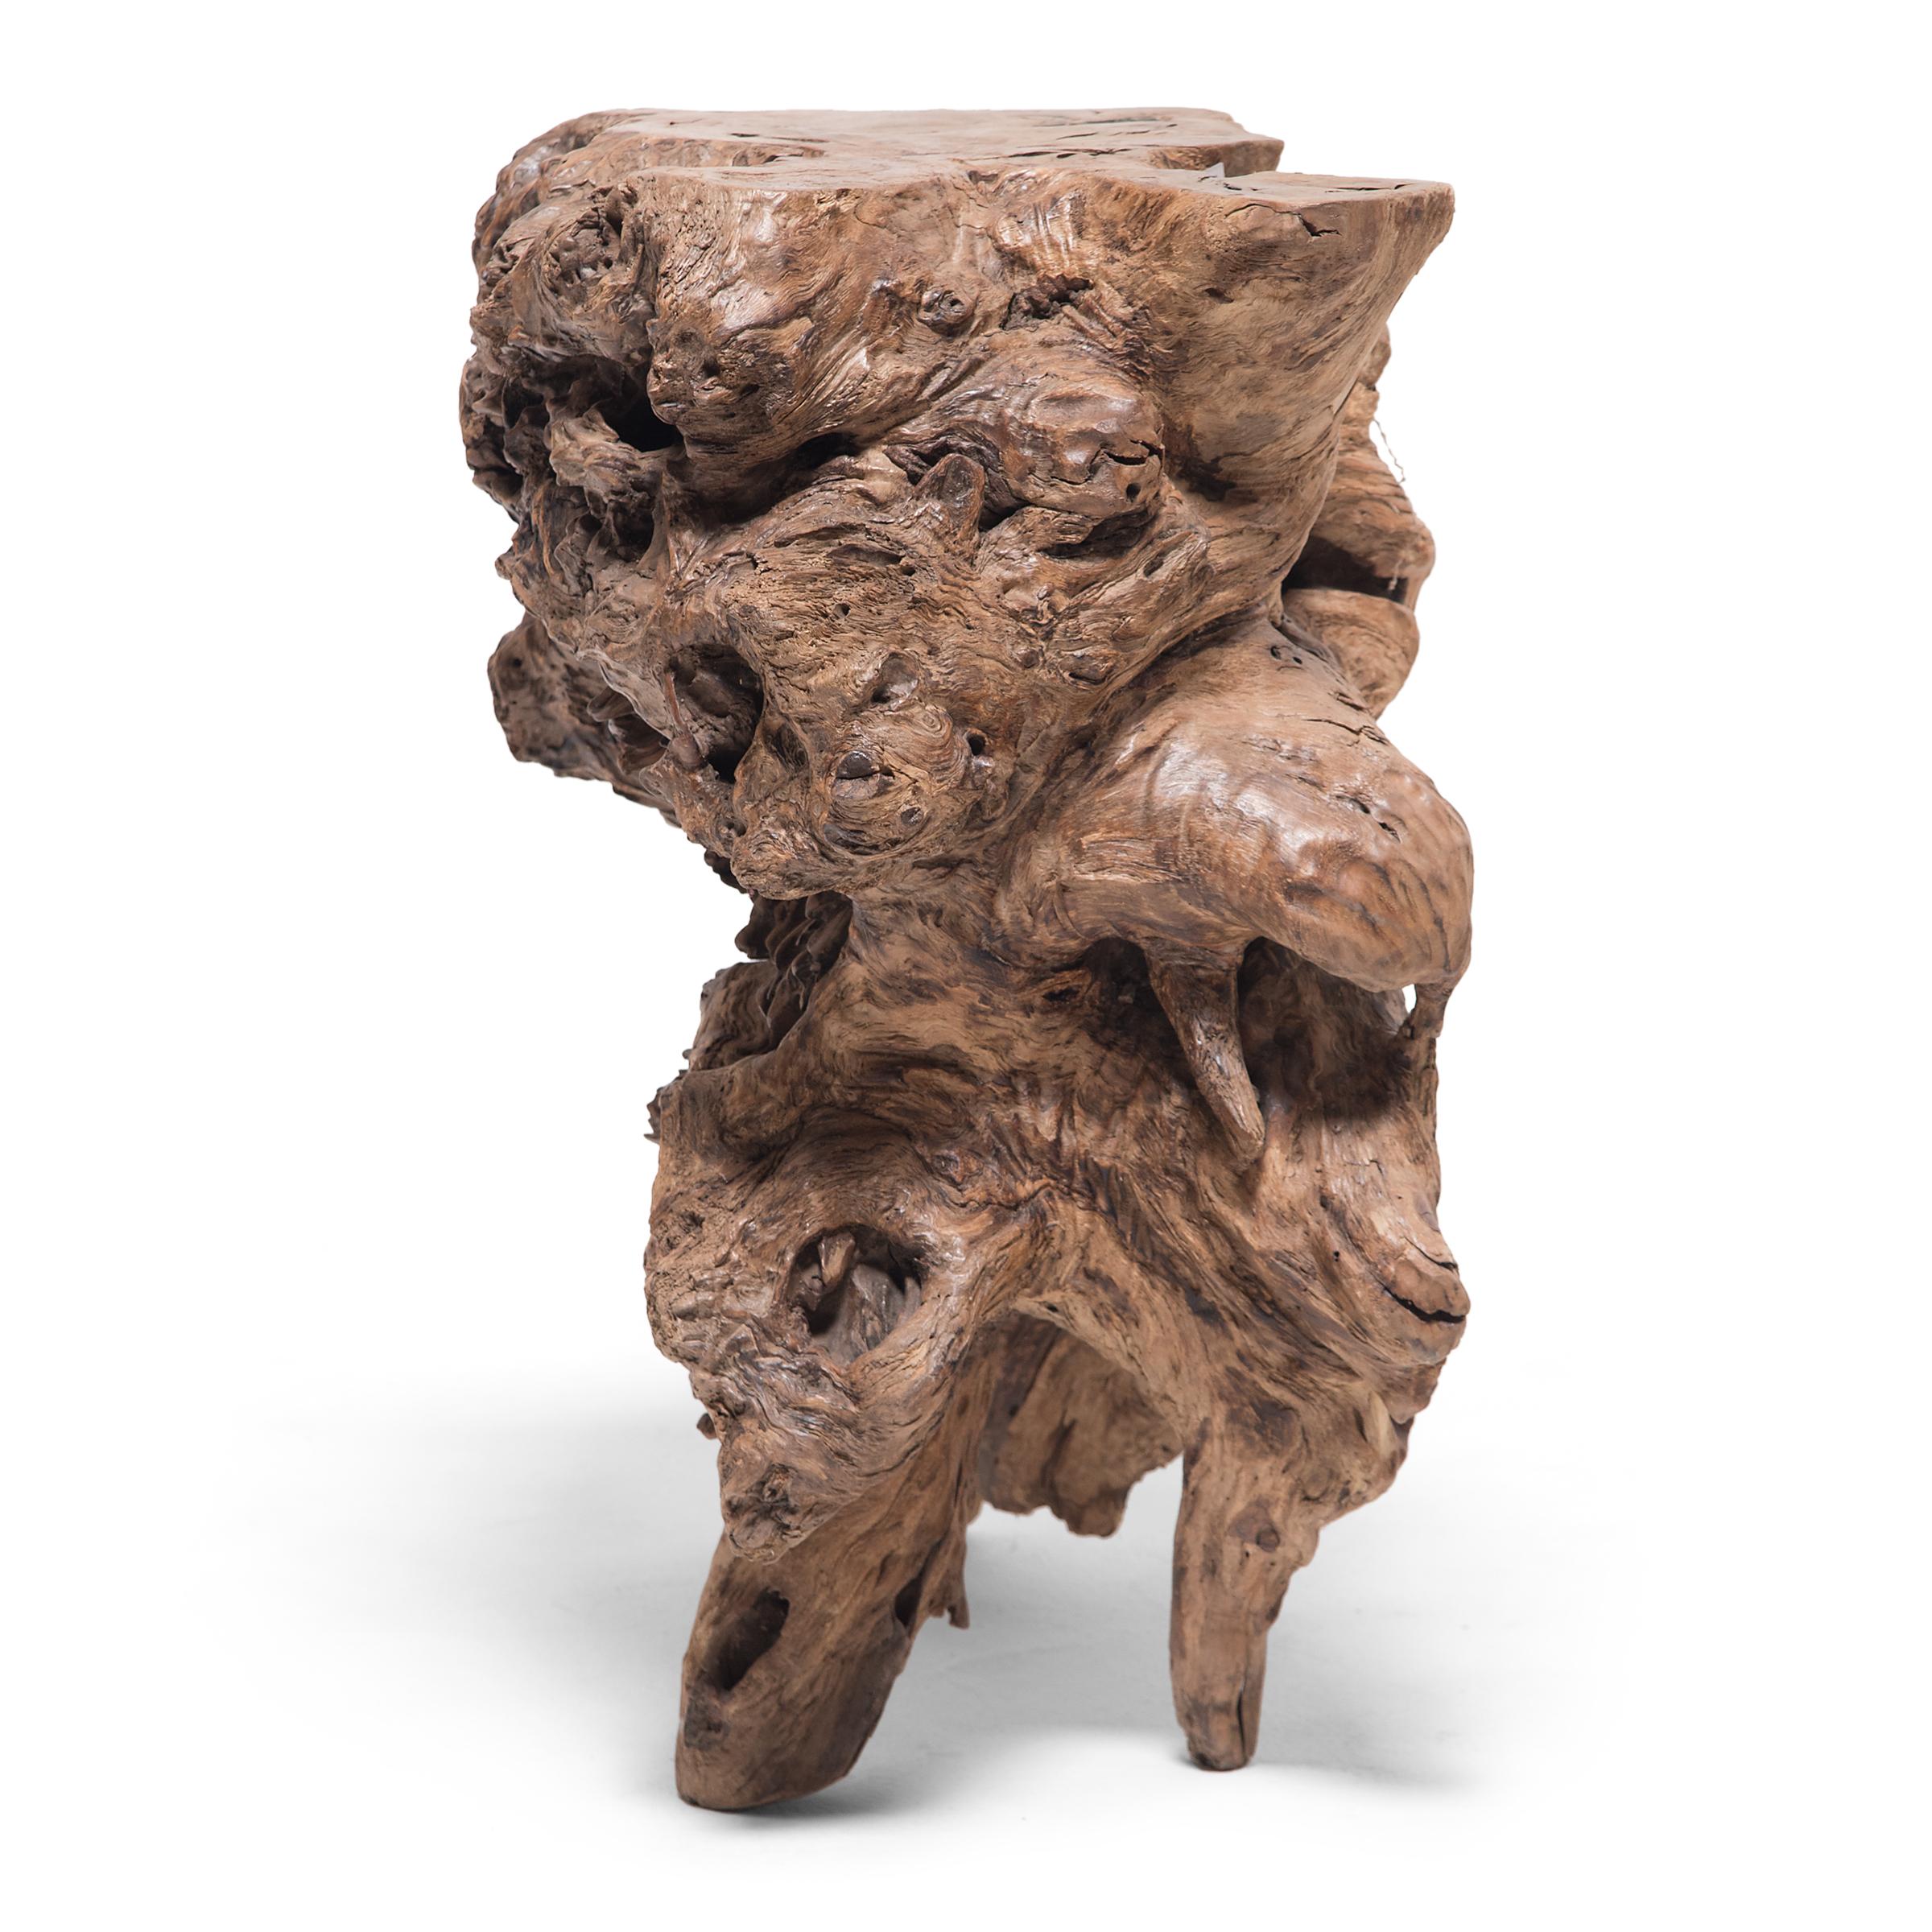 This unusual display table is formed from the spectacular, gnarled roots of a Chinese cypress tree (baimu). The table dates to the late-Qing dynasty, an era in which an elite class of artists and literati cultivated a taste for nature's